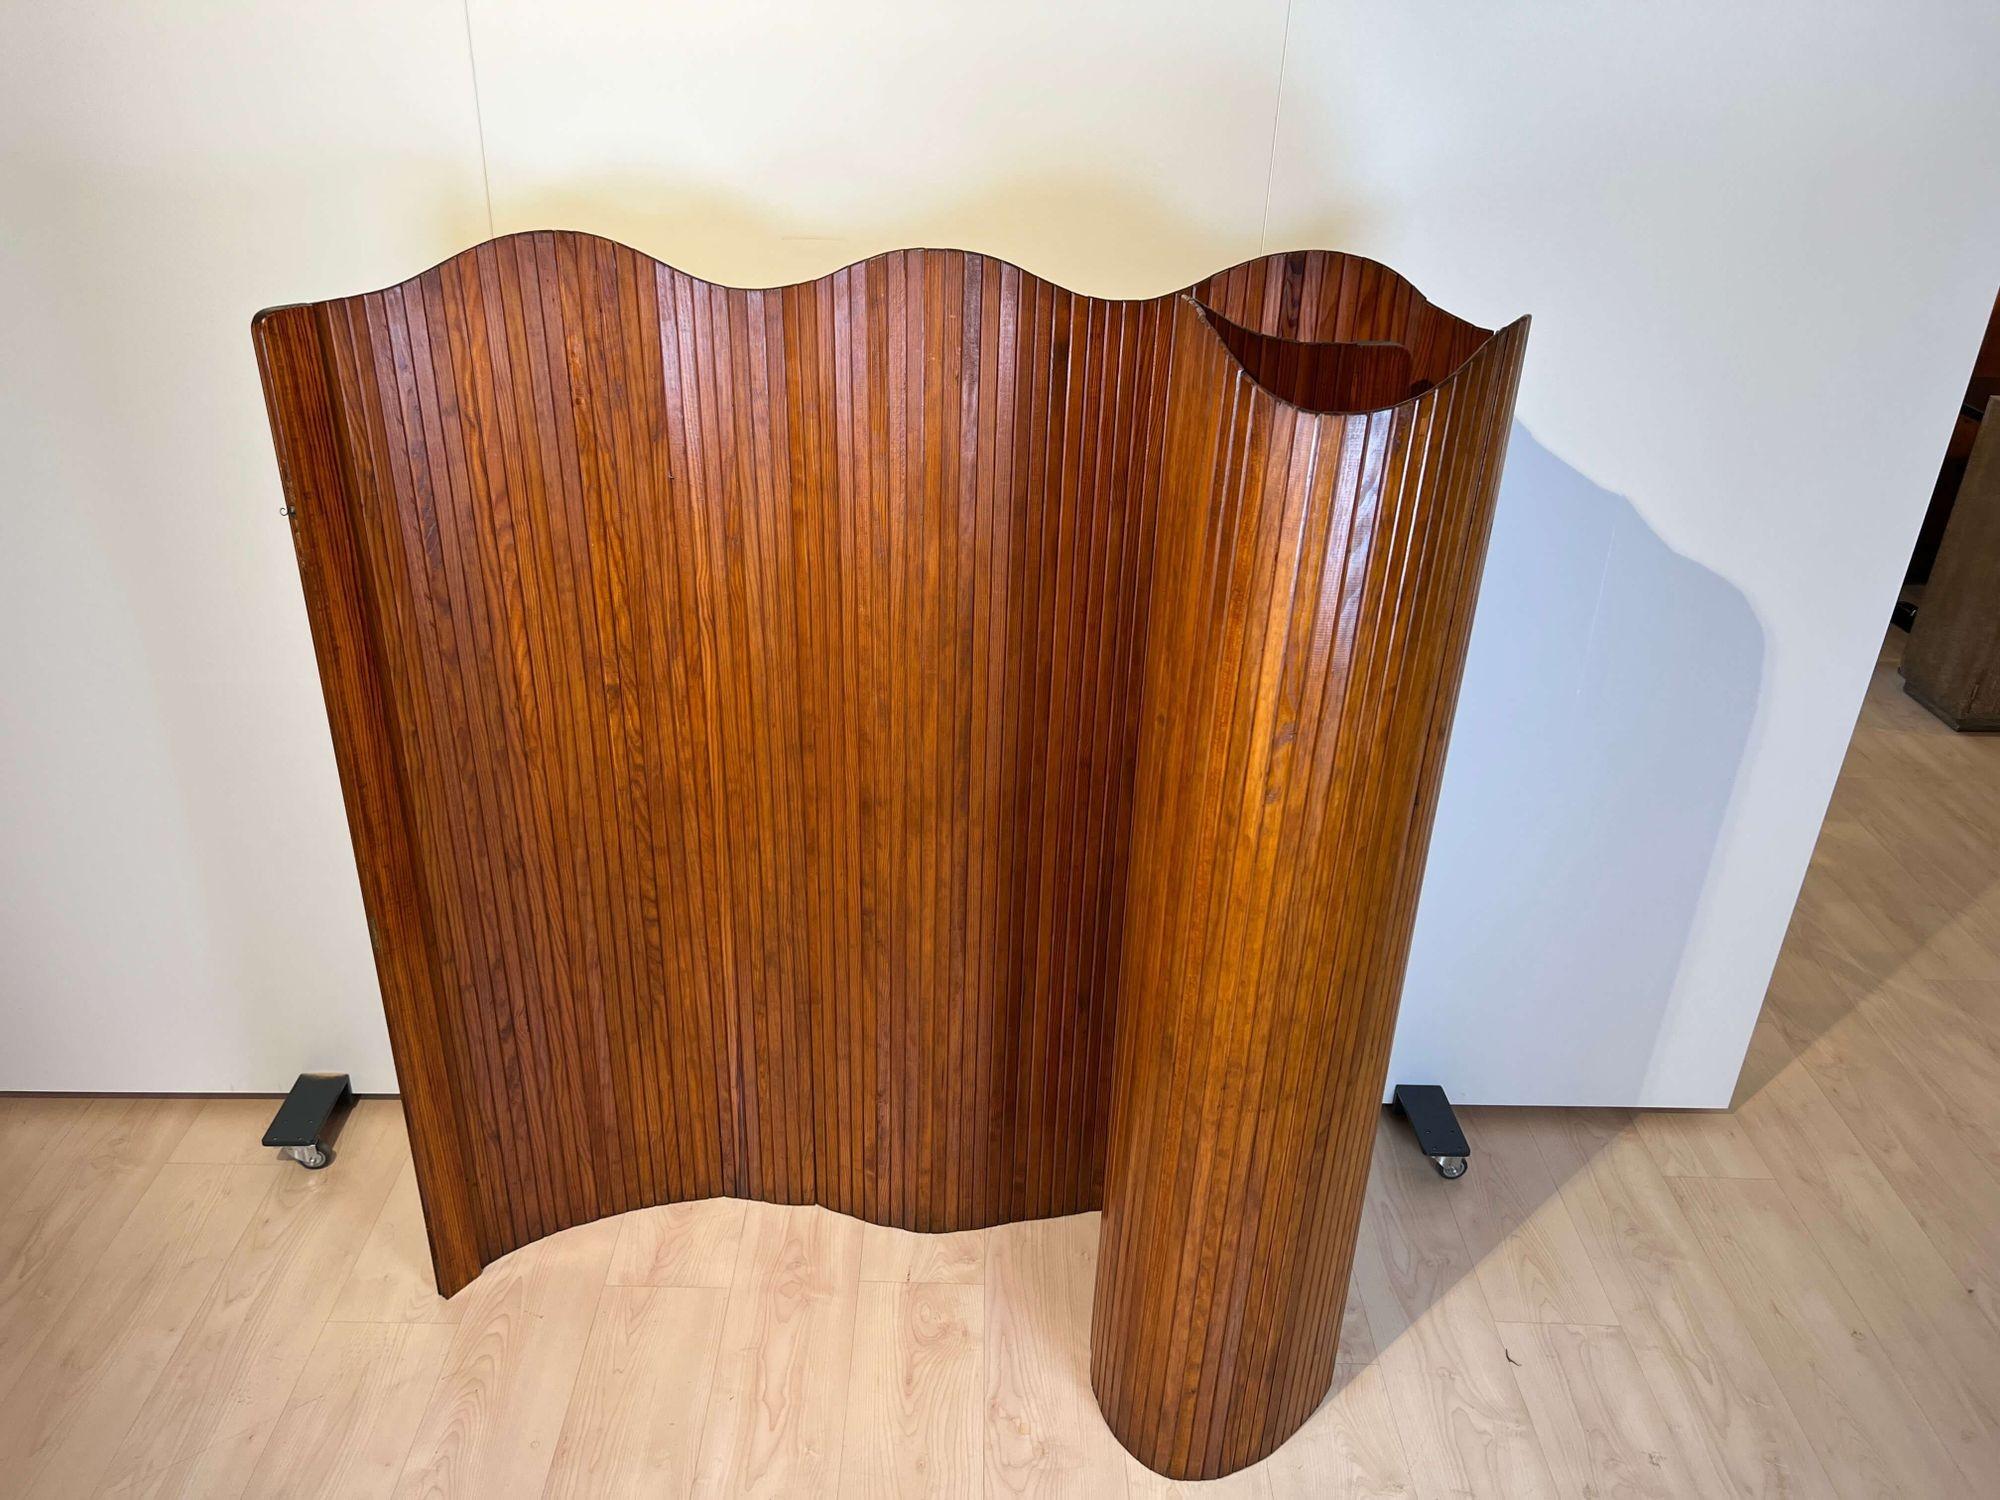 Beautiful Mid-Century Modern / Late Art Deco wooden Paravent, Room Divider or Screen by Baumann Fils & Cie, France, circa 1940.
Individual solid beech slats, conservative restoration with shellac french polish. Felible in its form, it can be ruled